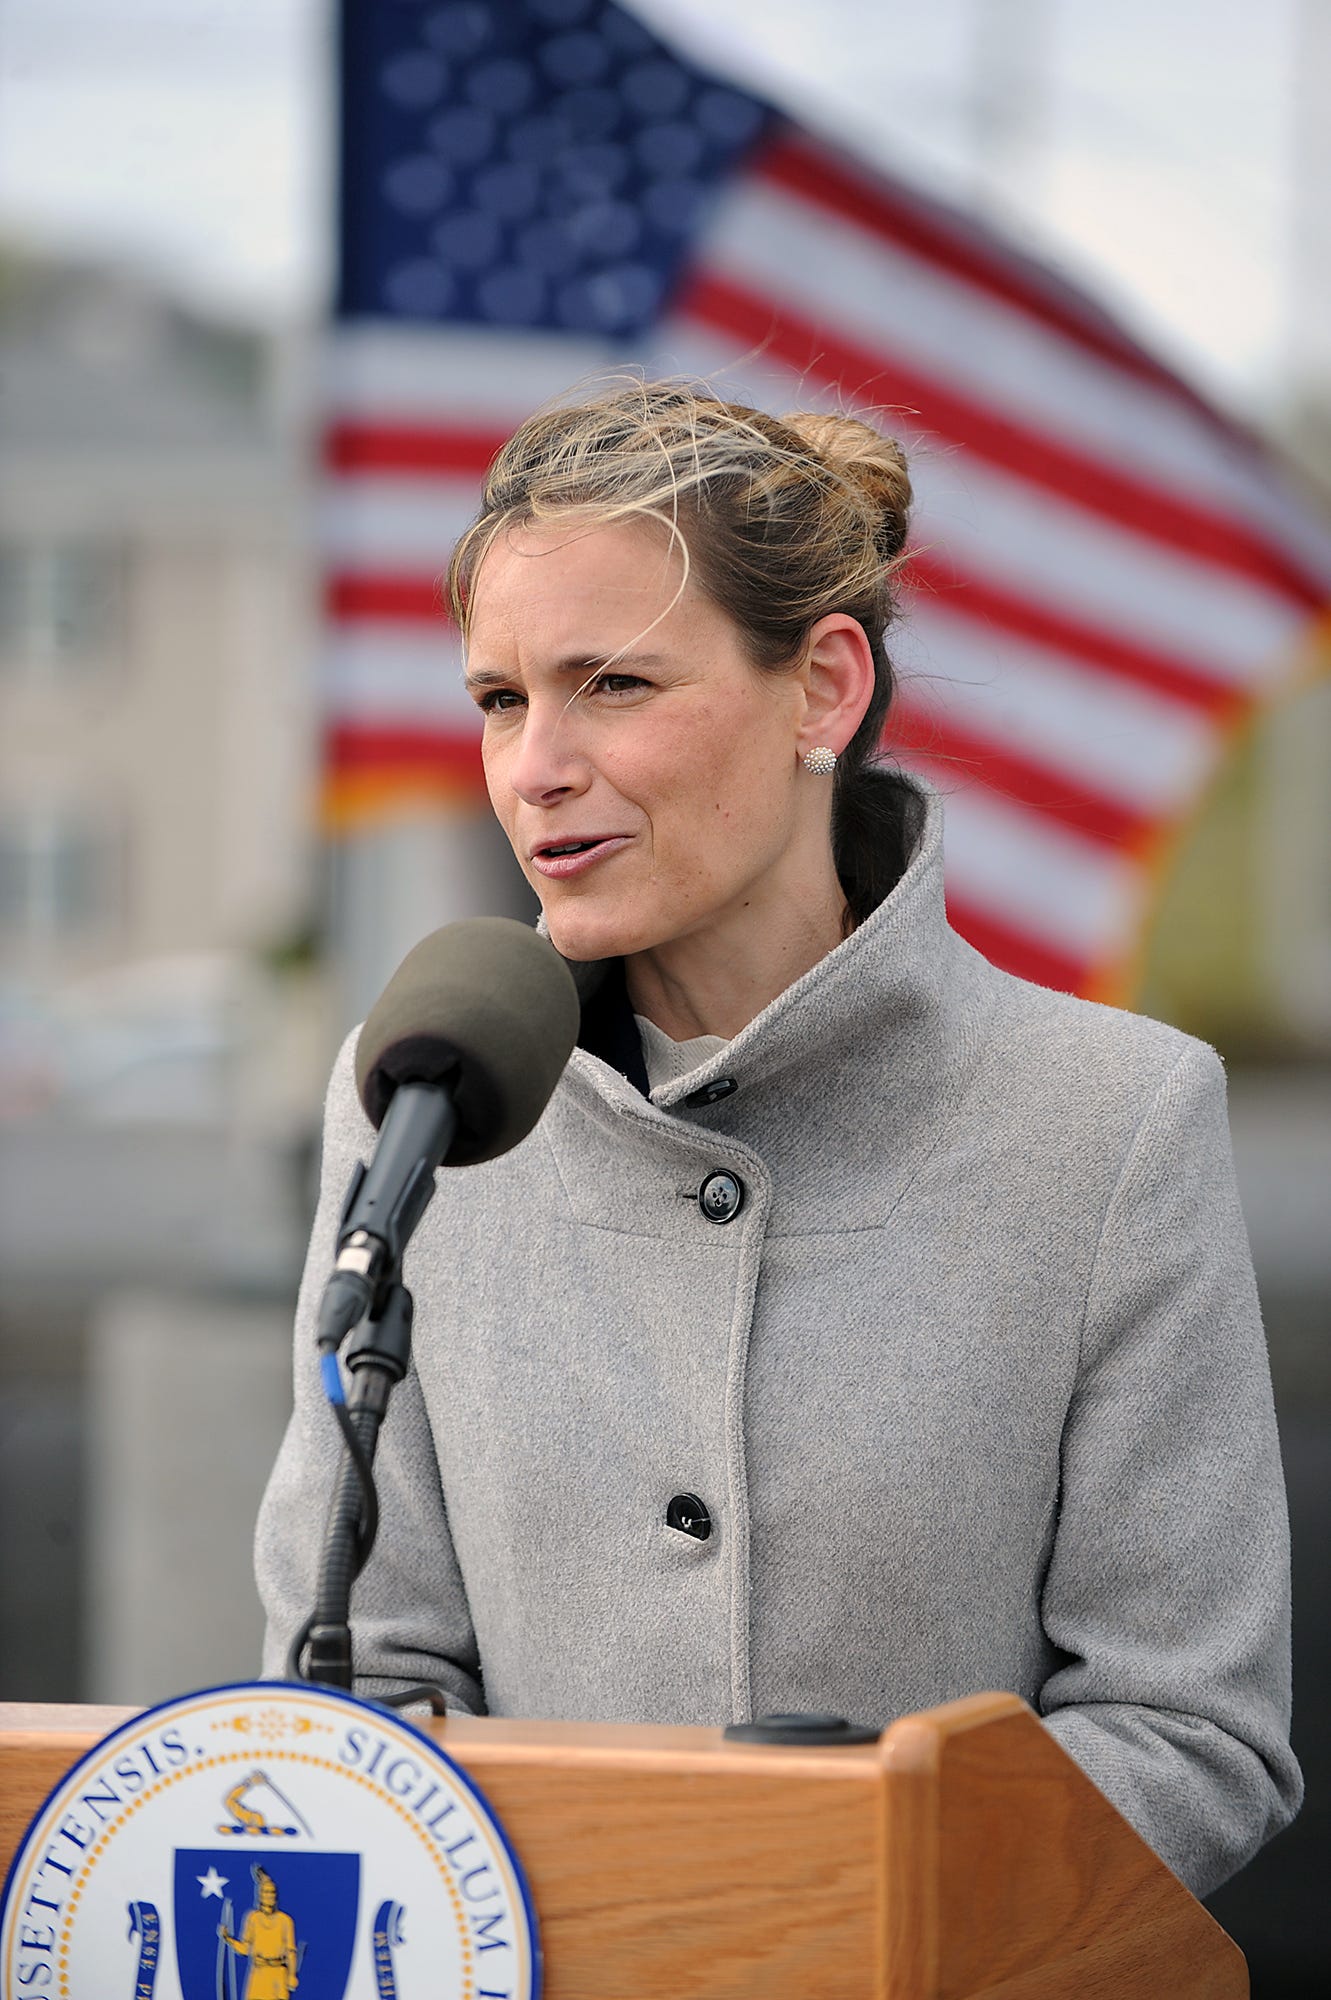 Massachusetts Secretary of Energy and Environmental Affairs Kathleen Theoharide speaks at a Framingham Earth Day celebration on April 22, 2021. She said the state is leading the way in the U.S. with offshore wind job training programs.